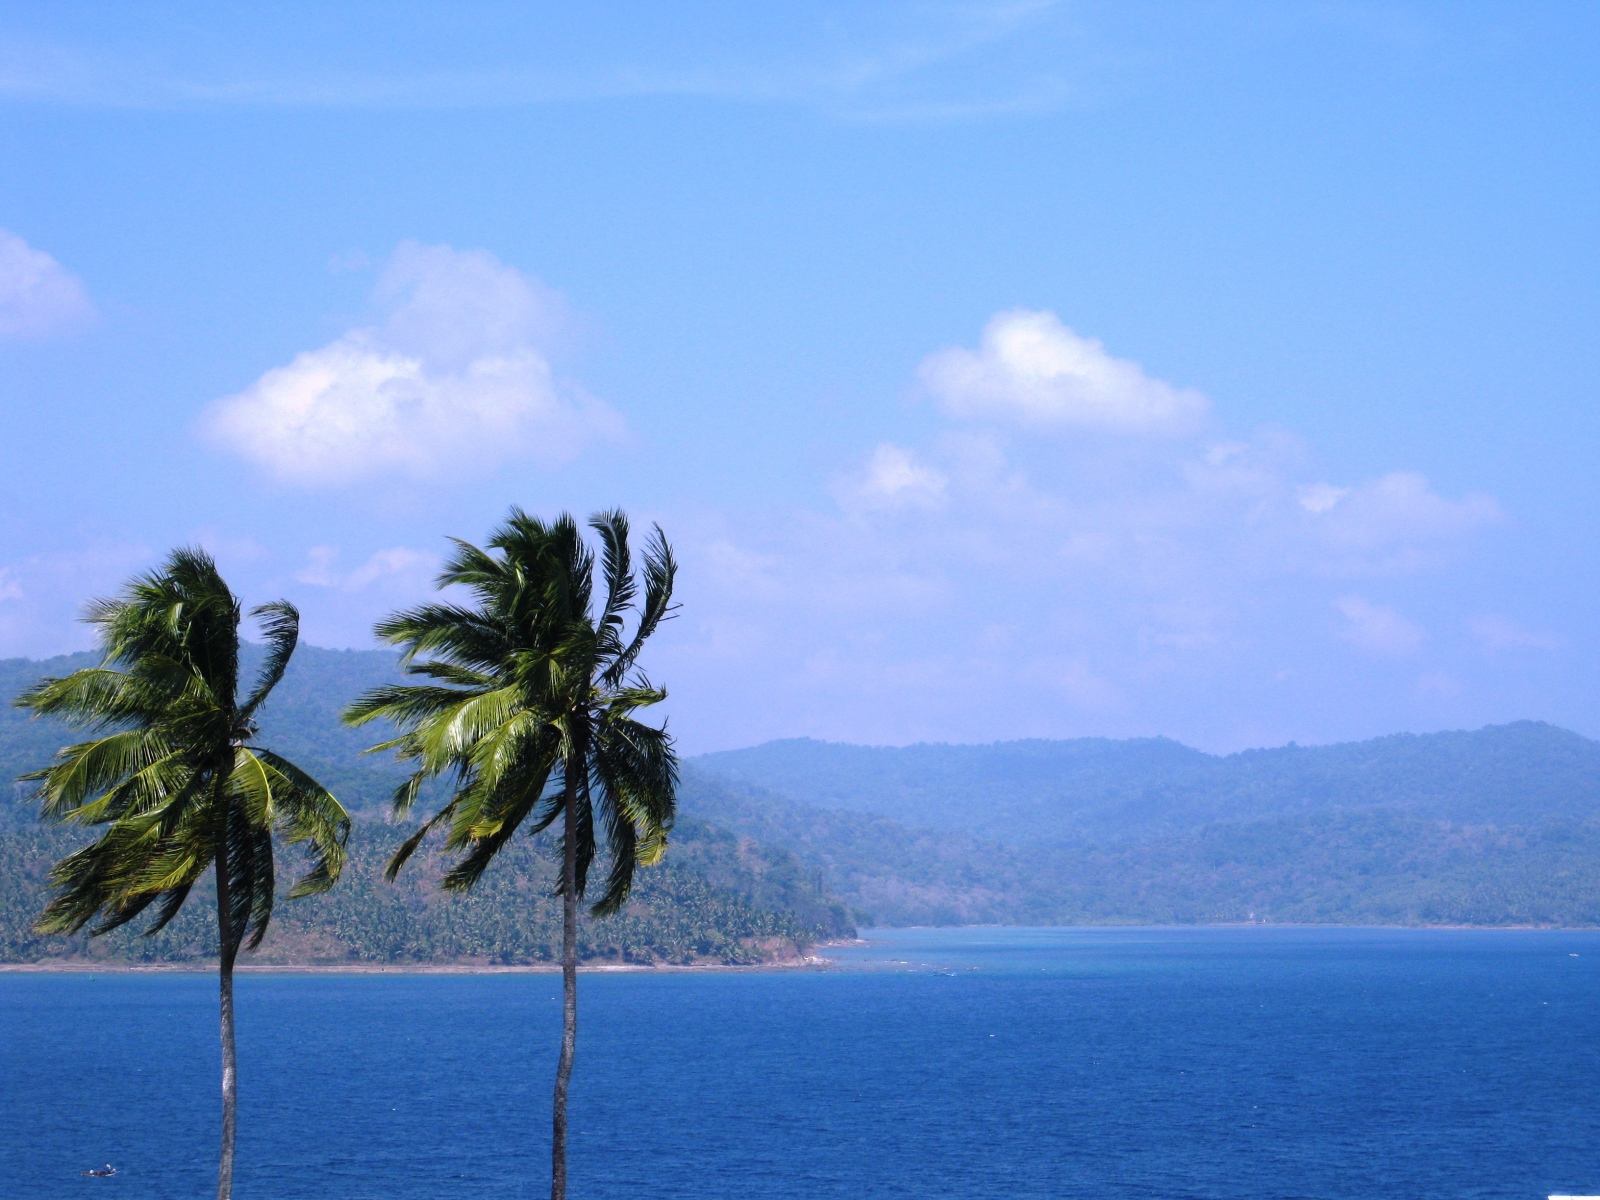 Tall palm trees on the Andaman Islands